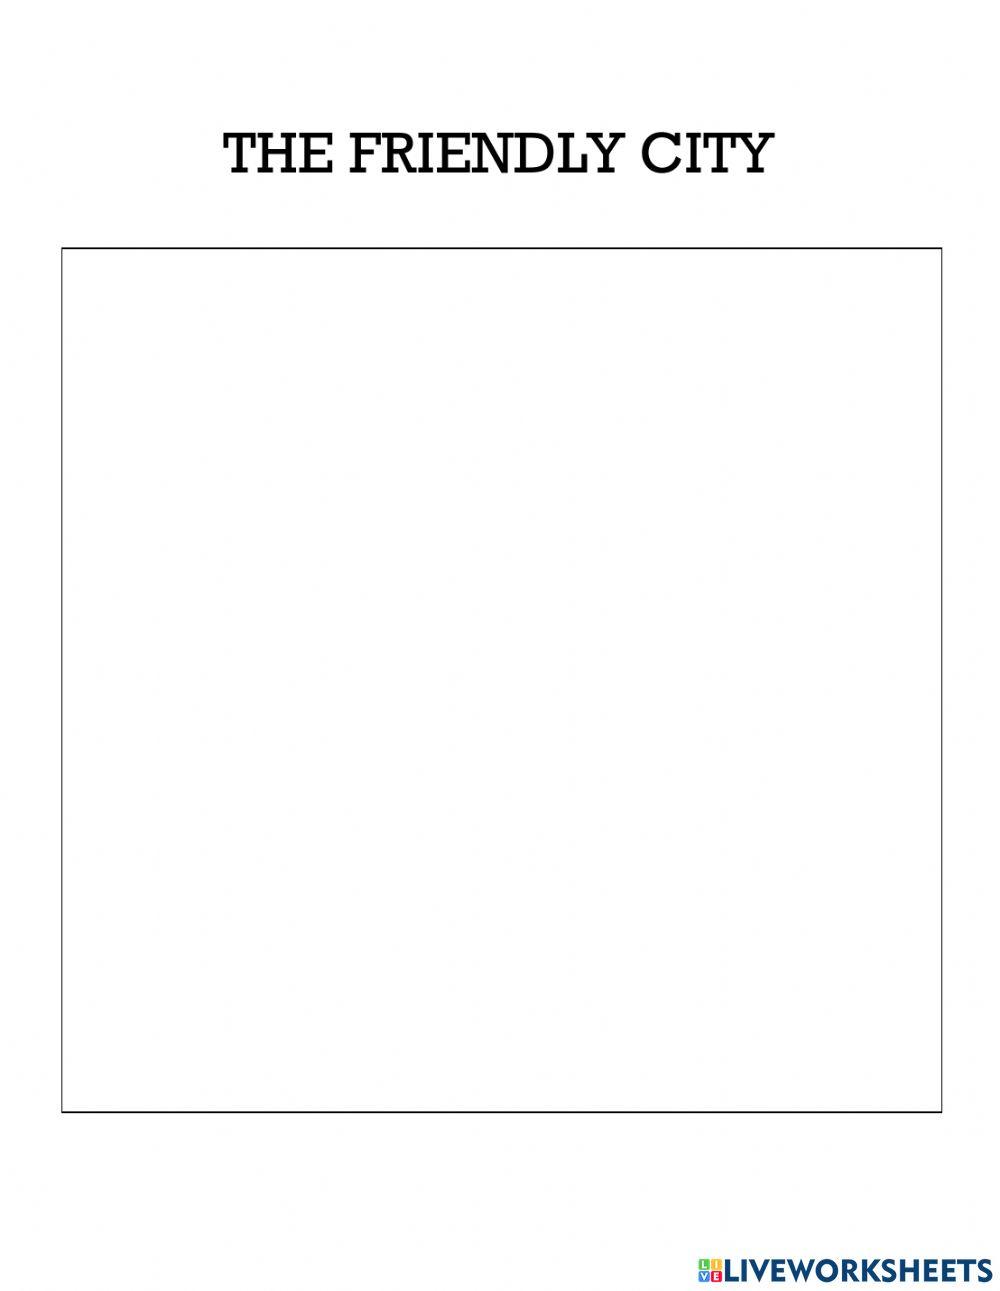 The friendly city